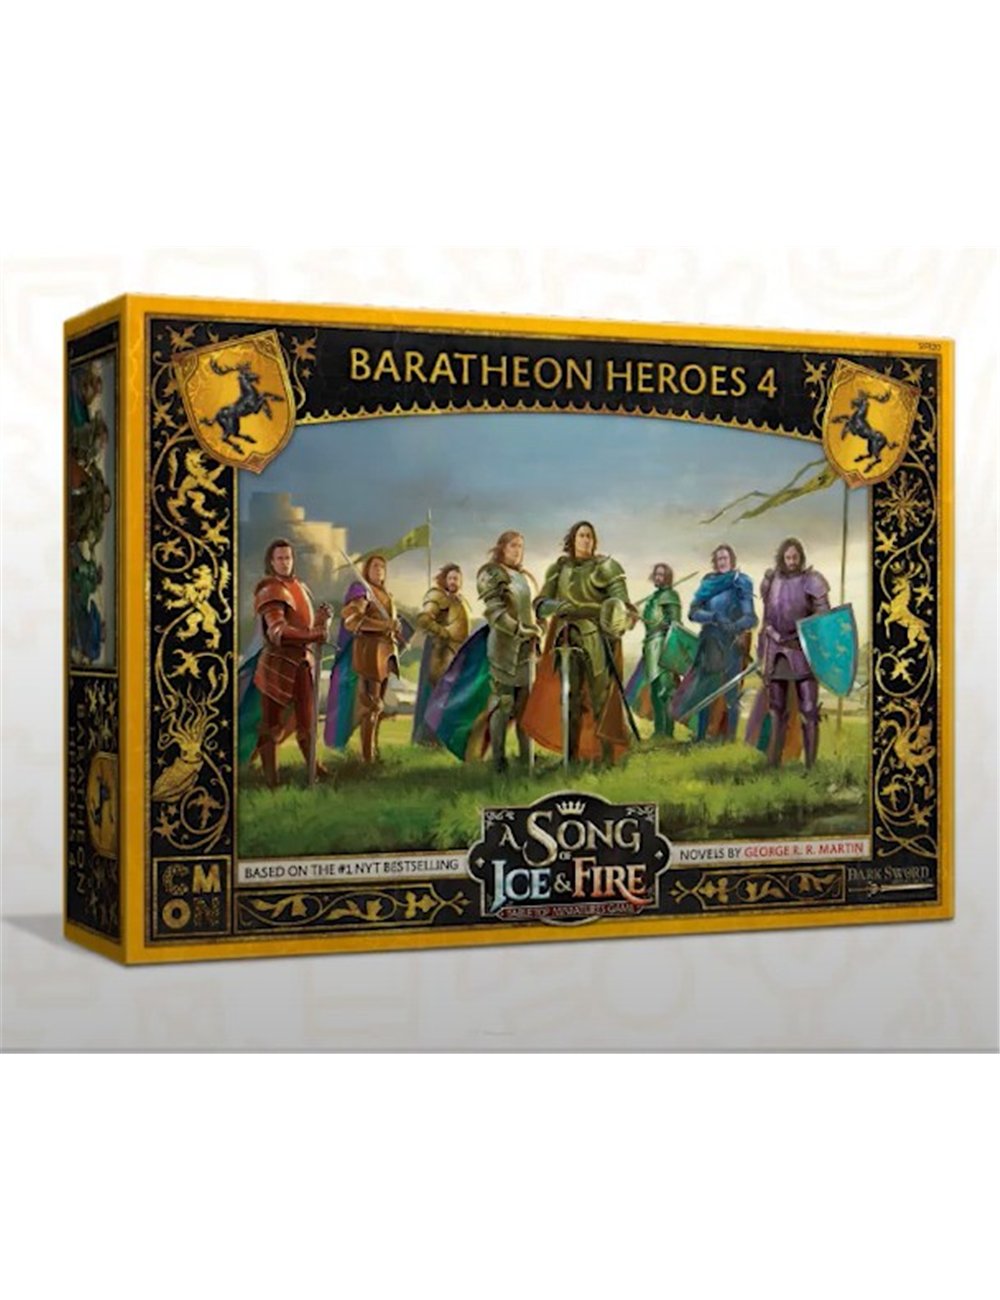 A SONG OF ICE & FIRE - Baratheon Heroes 4